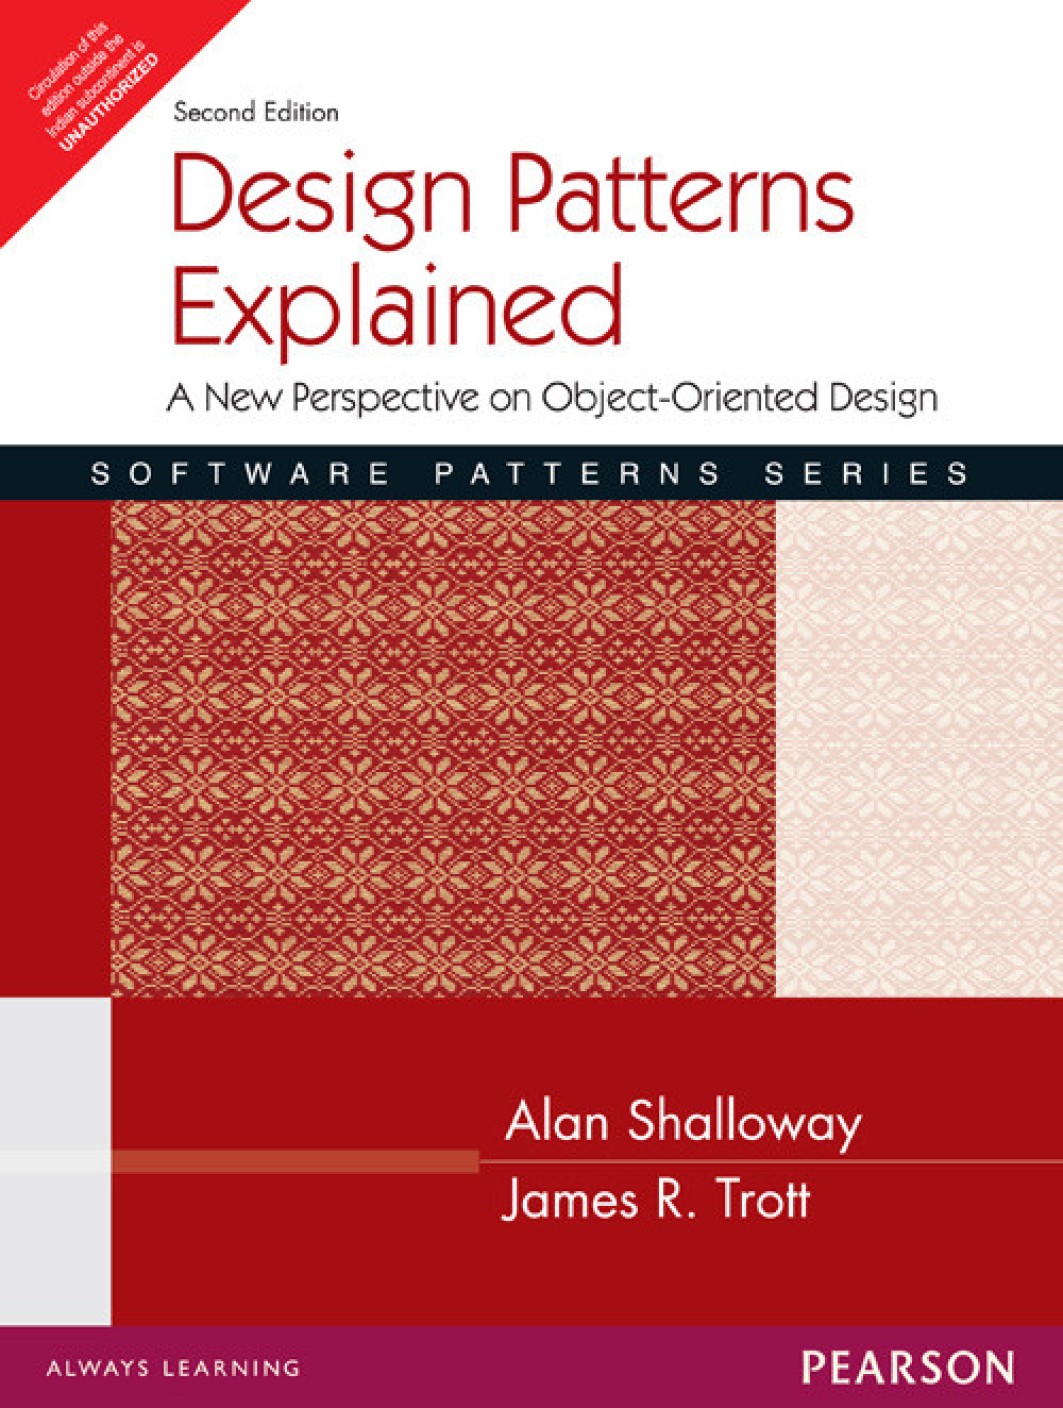 design patterns book review